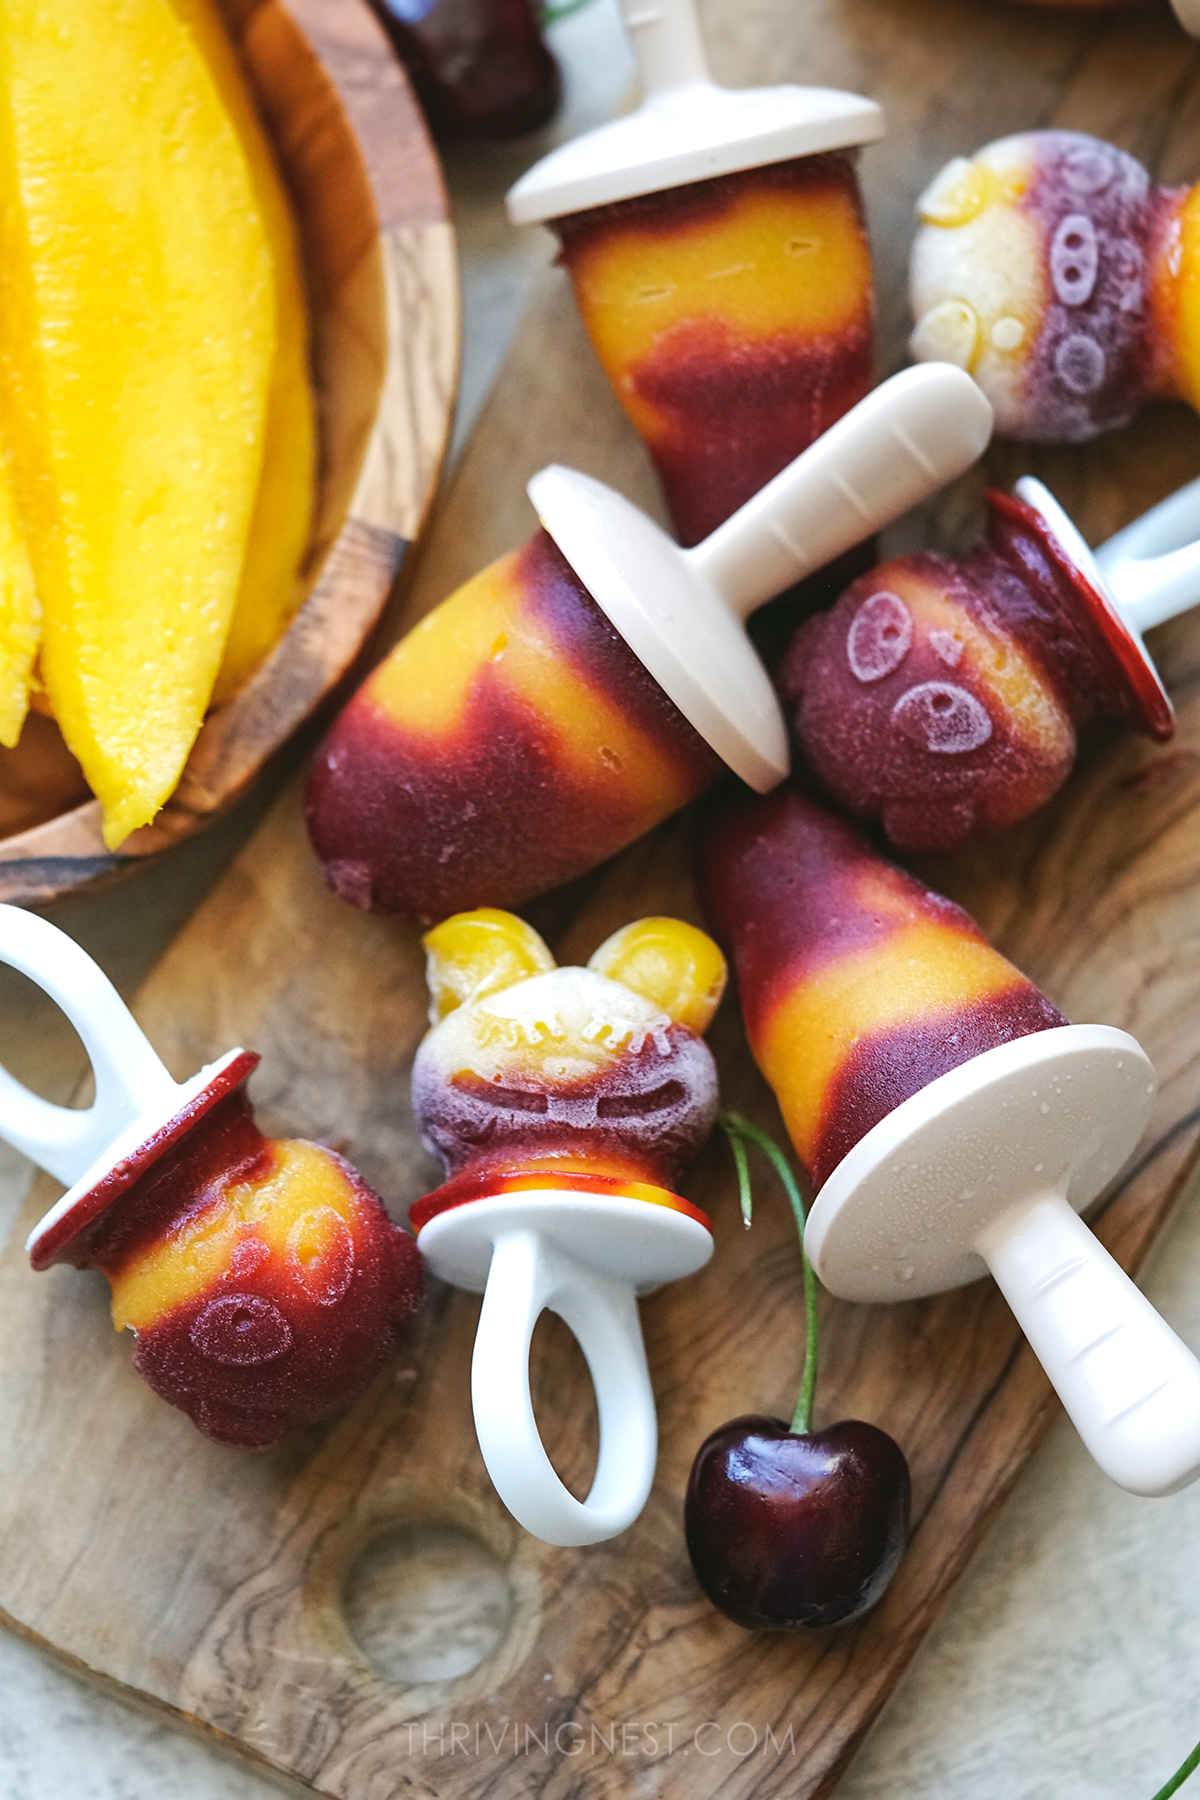 Mango and cherry popsicles made with animal silicone molds.